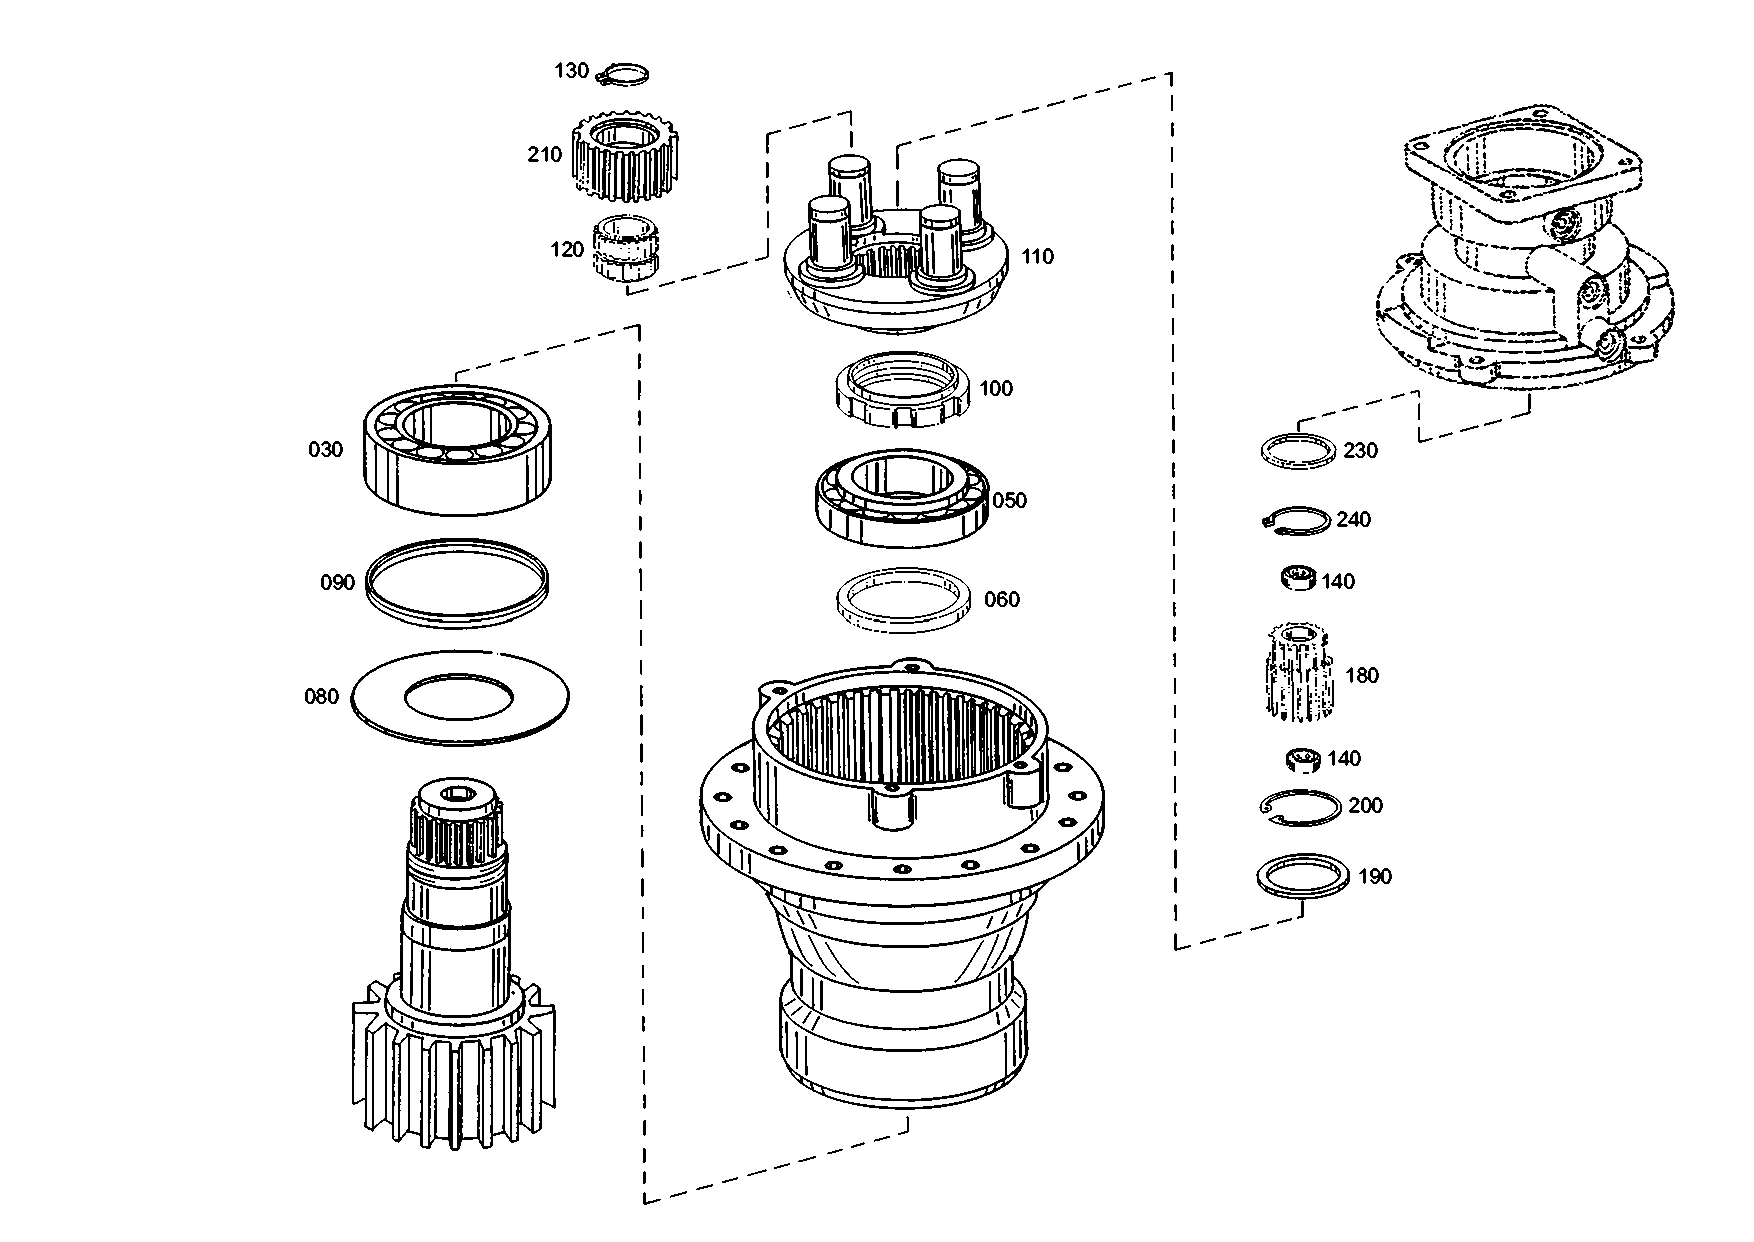 drawing for FUCHS-BAGGER GMBH + CO.KG 5904658880 - CYL. ROLLER BEARING (figure 1)